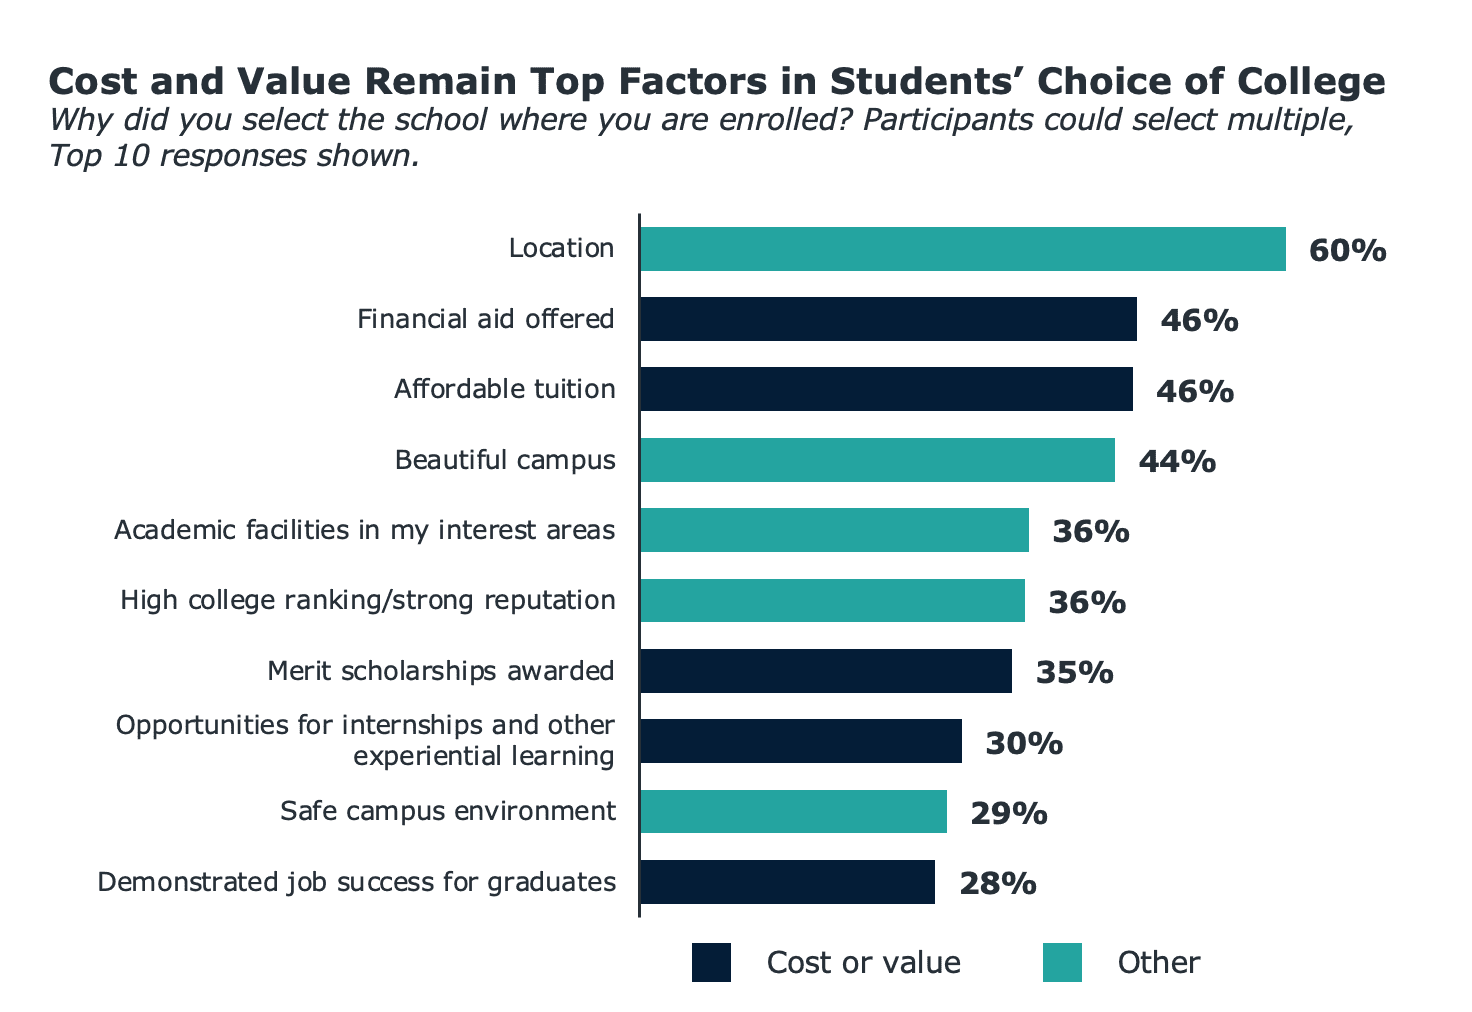 Bar chart showing top factors in students' choice of college.